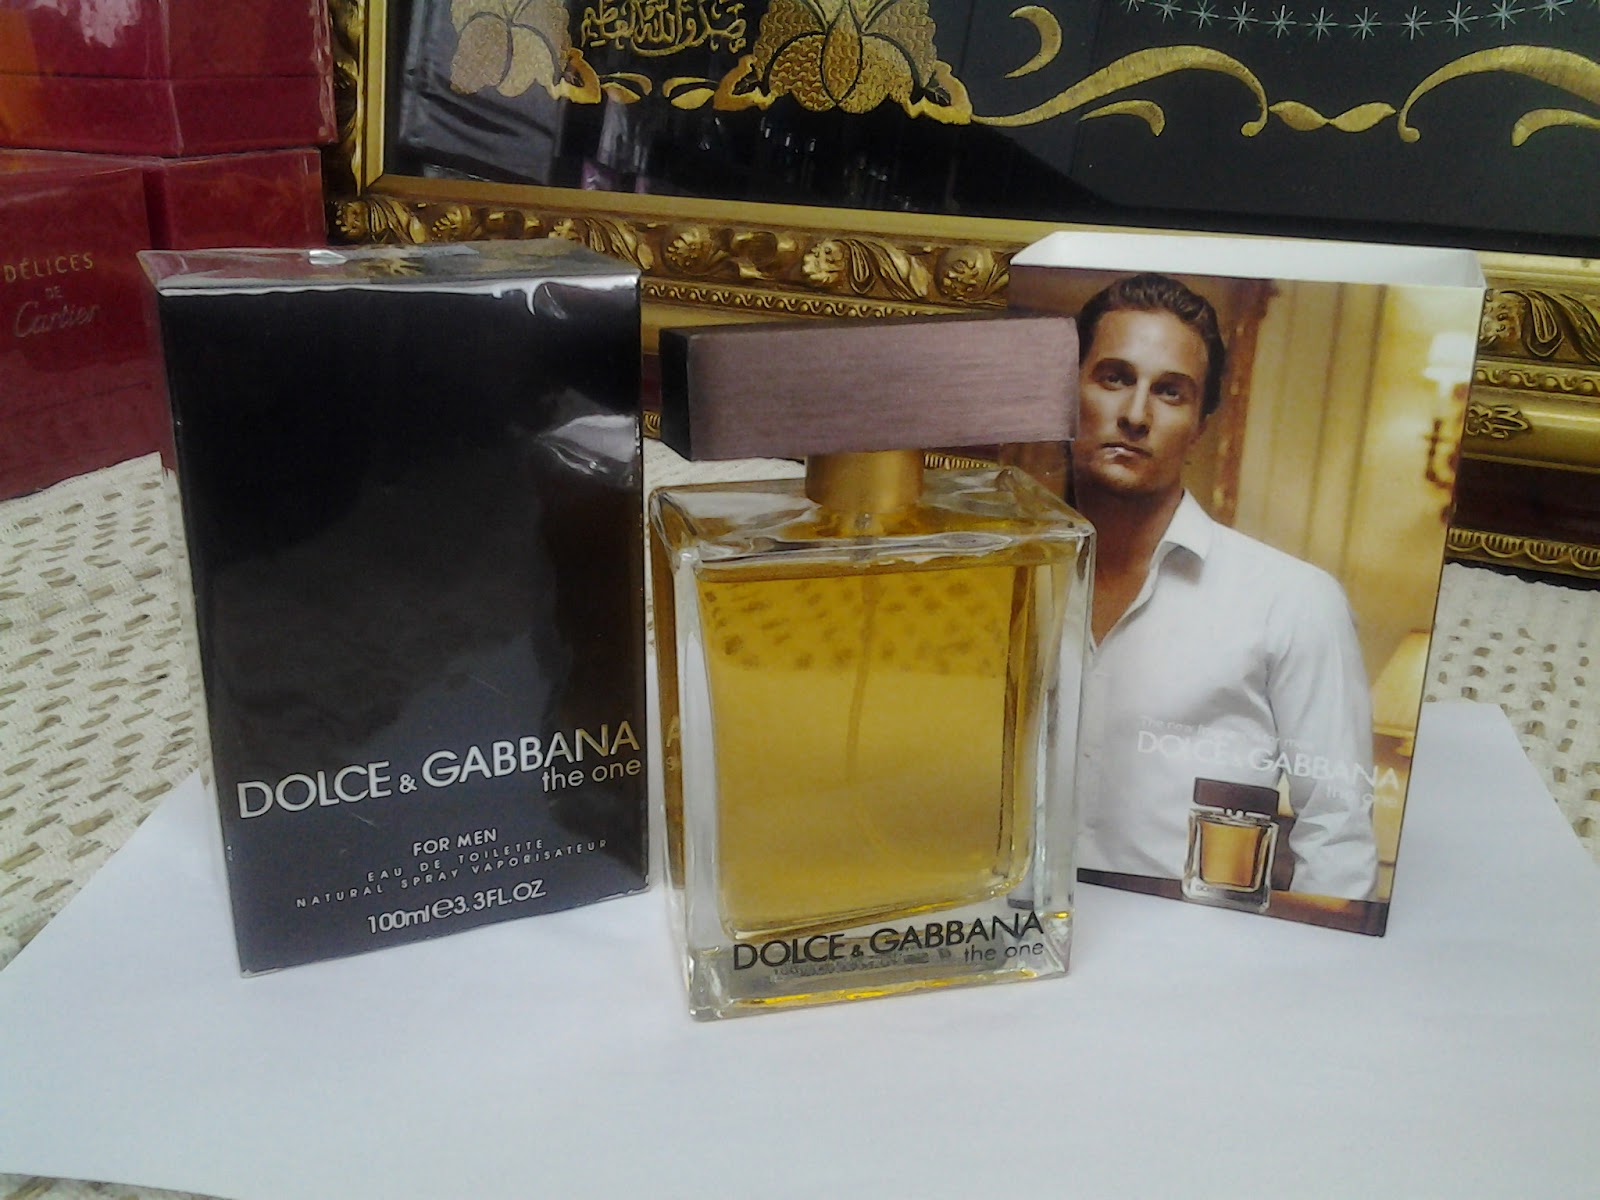 importer, wholesaler and distributor of International Branded Perfumes ...